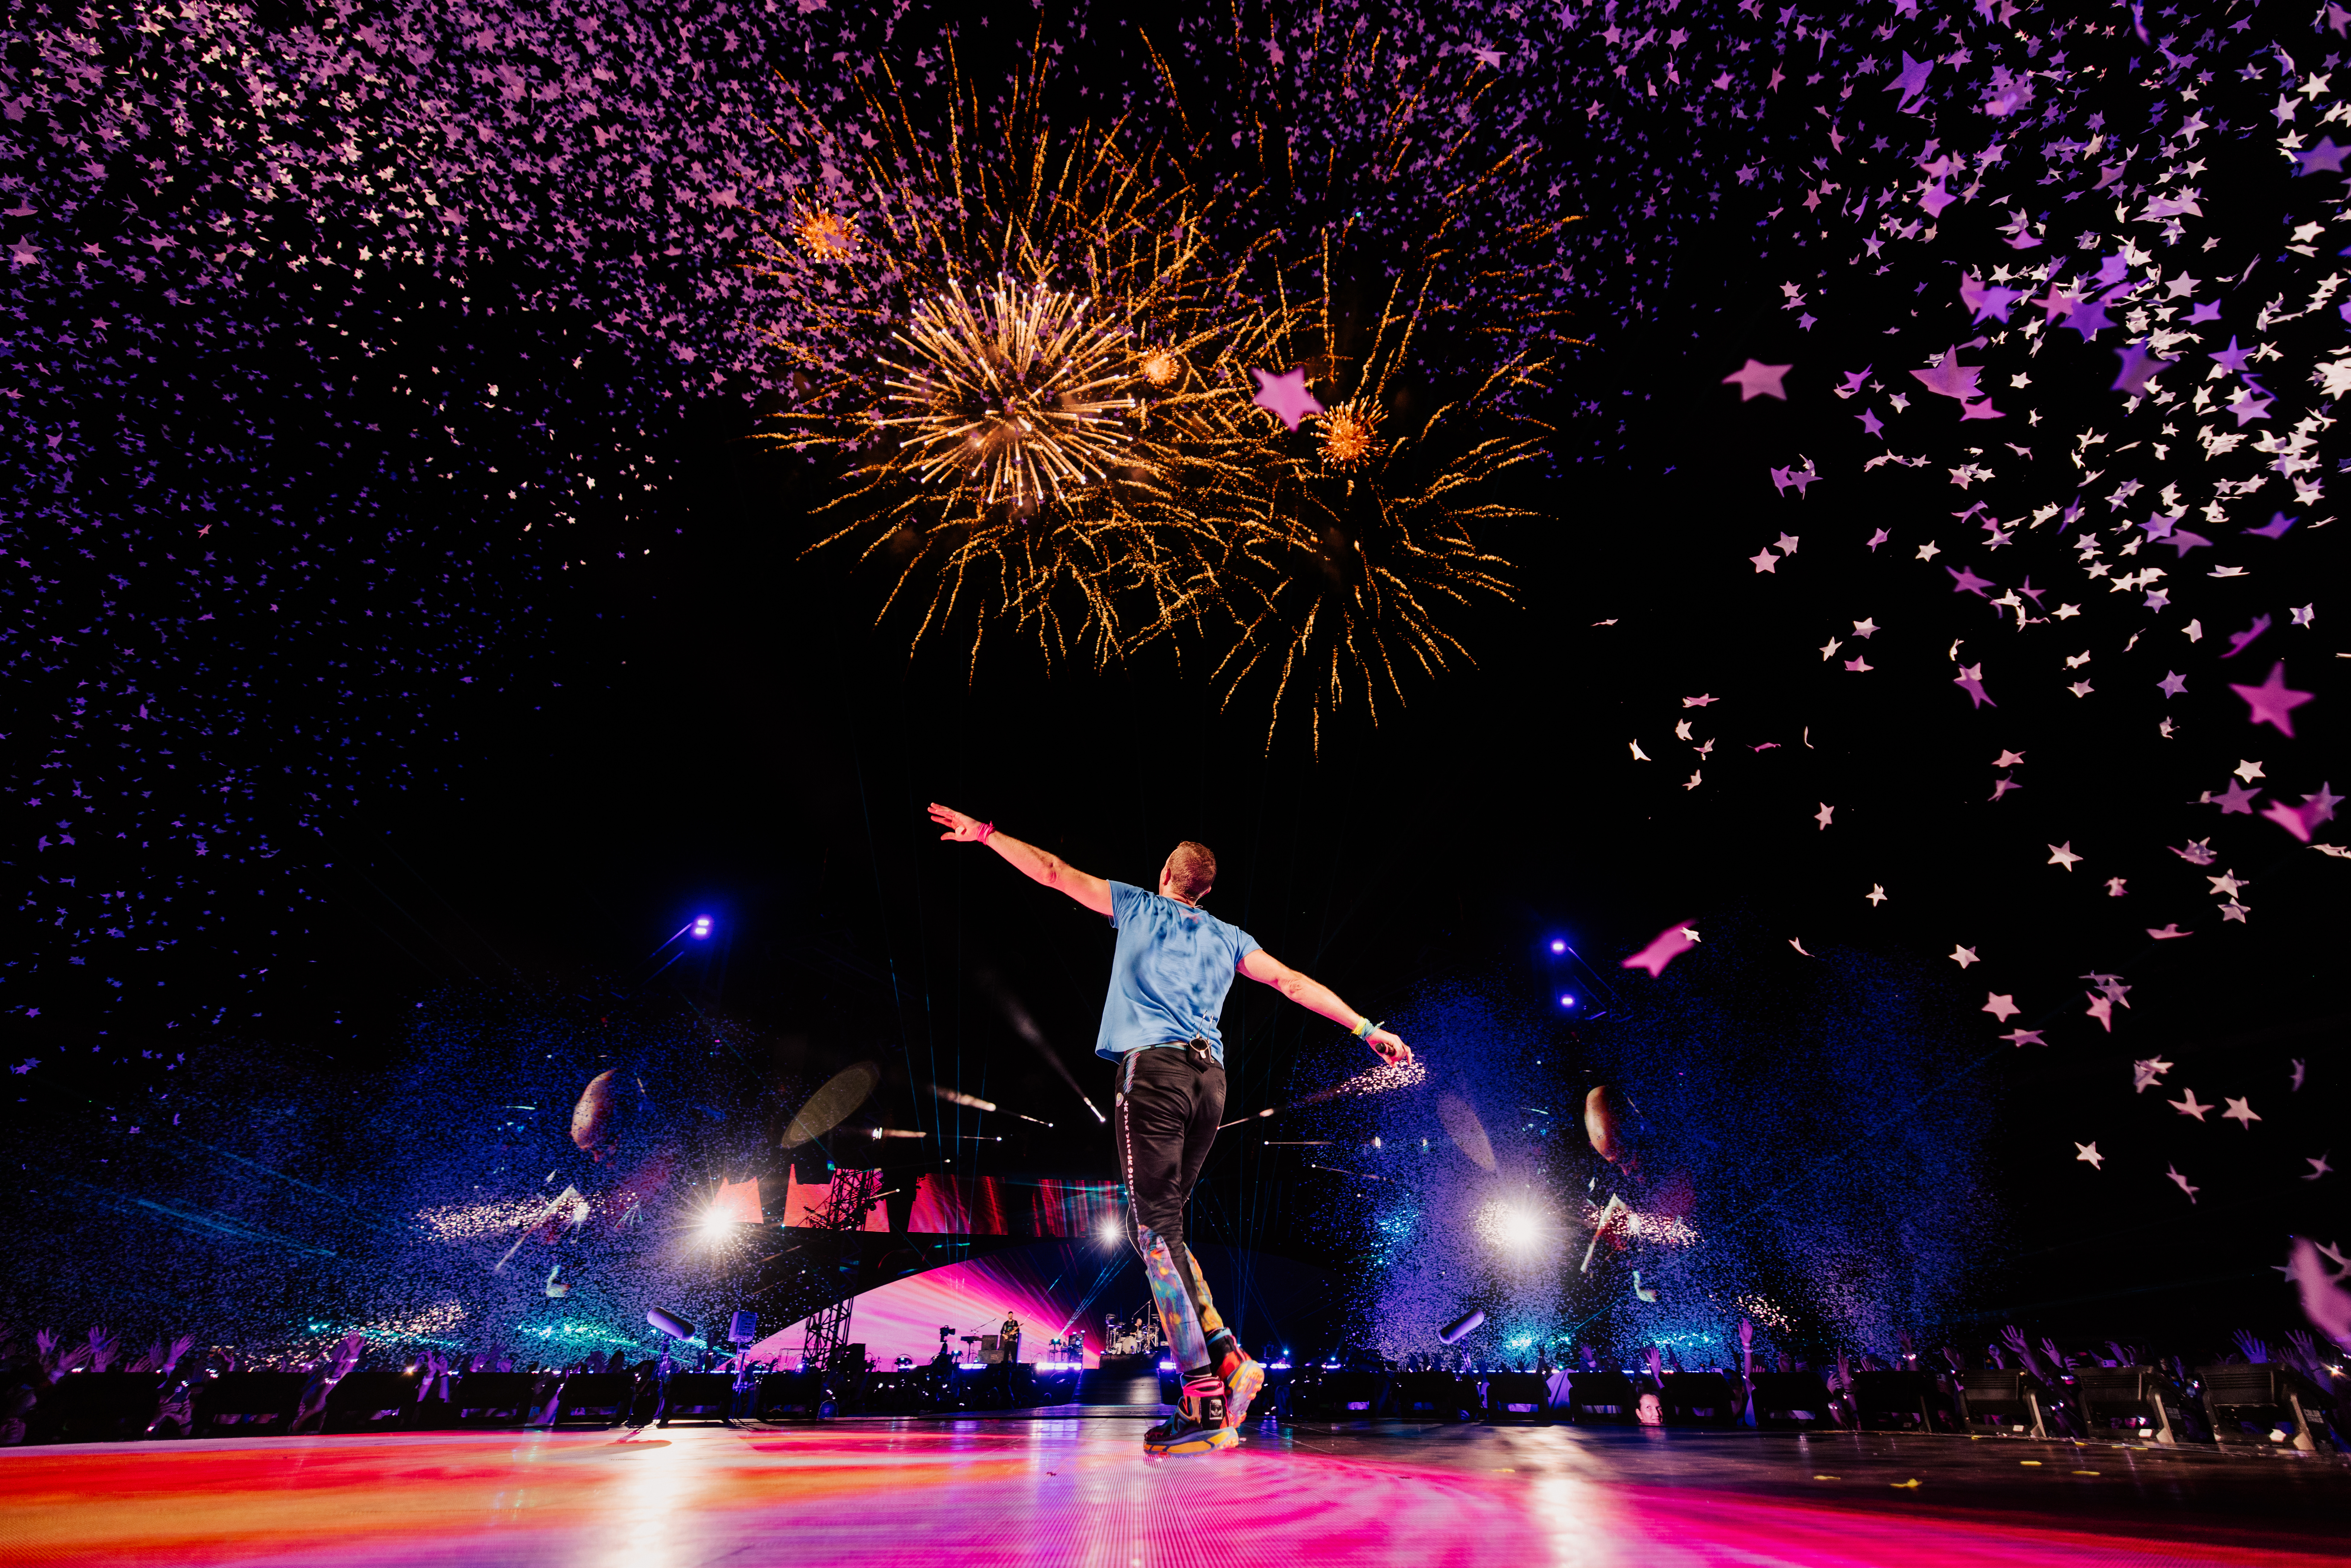 Don’t miss your last chance to watch coldplay’s music of the spheres world tour in kl!